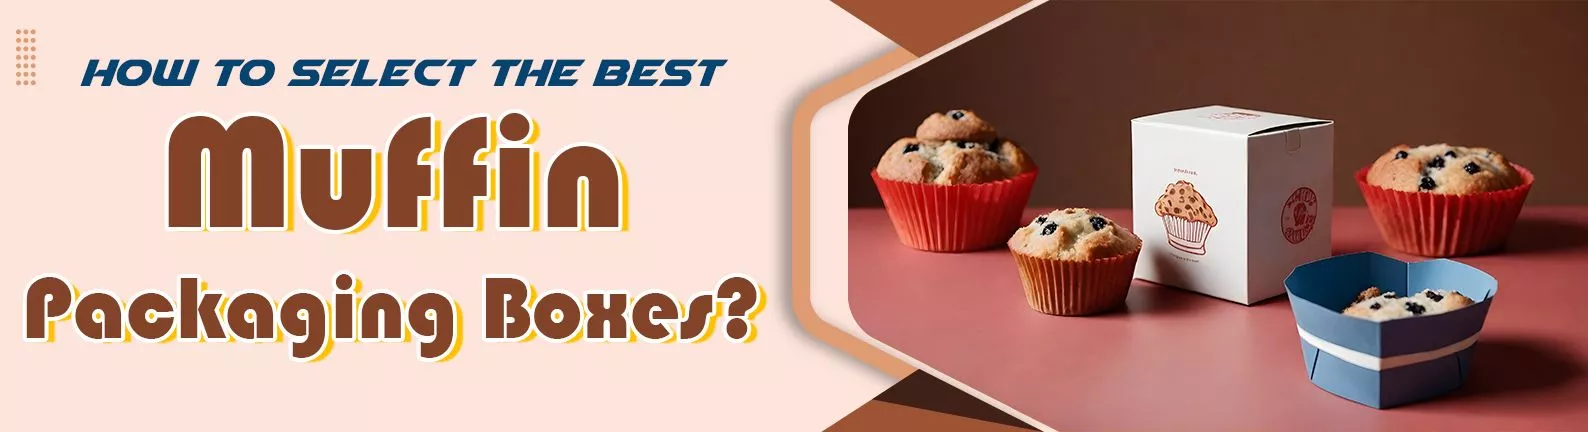 How-To-Select-the-Best-Muffin-Packaging-Boxes